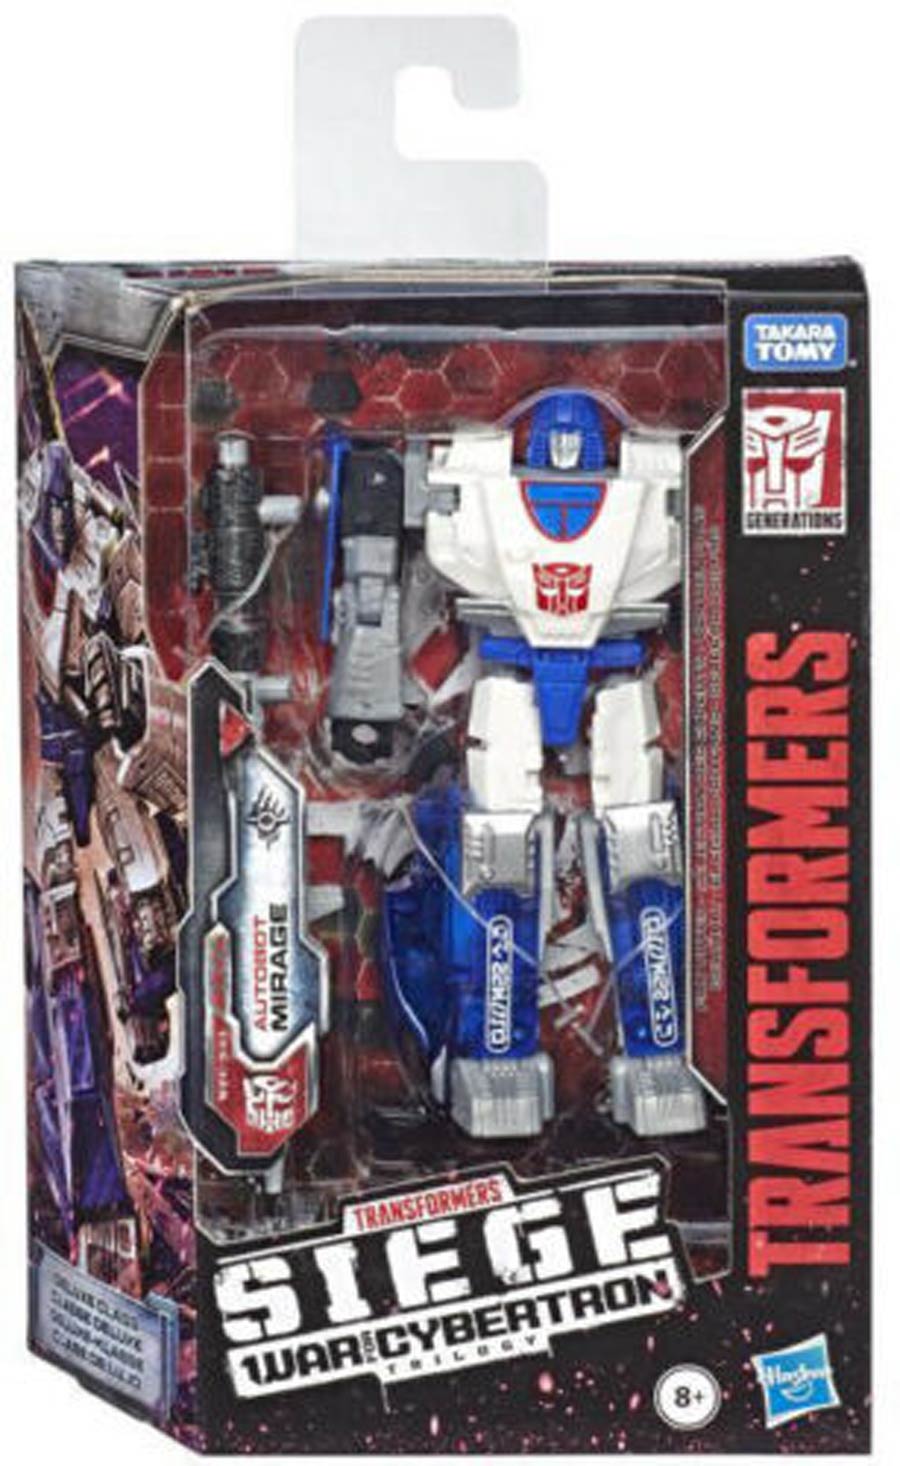 Transformers War For Cybertron Deluxe Class Action Figure - Autobot Mirage